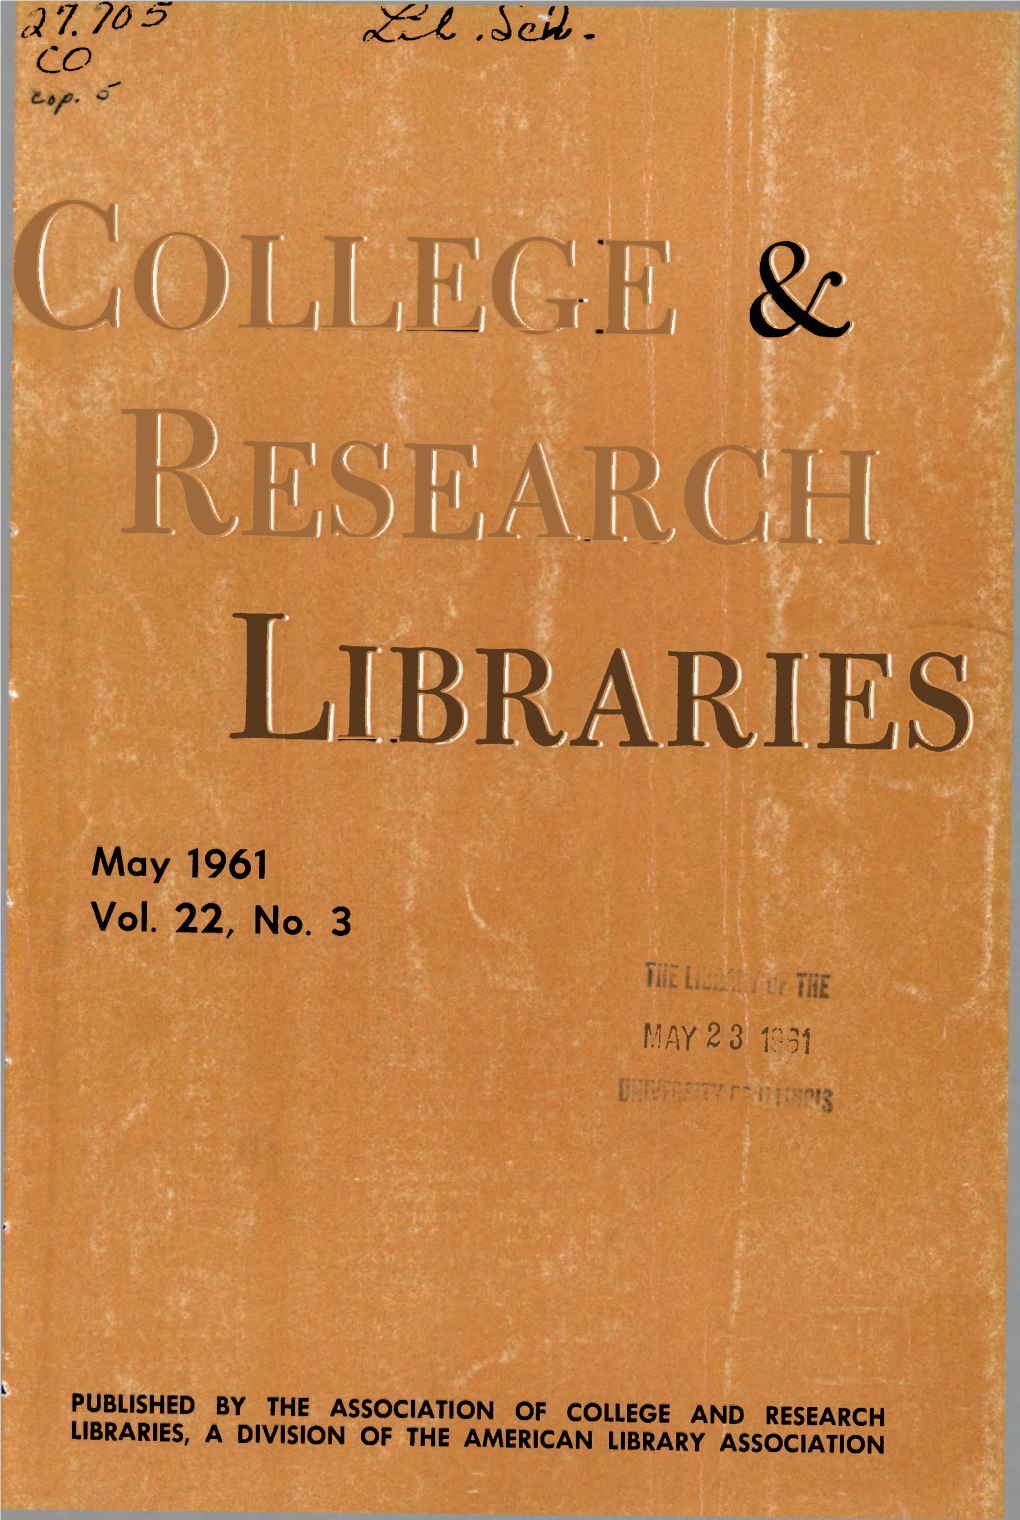 College and Research Libraries, a Division of the American Library Association Your New Catalog Is Ready